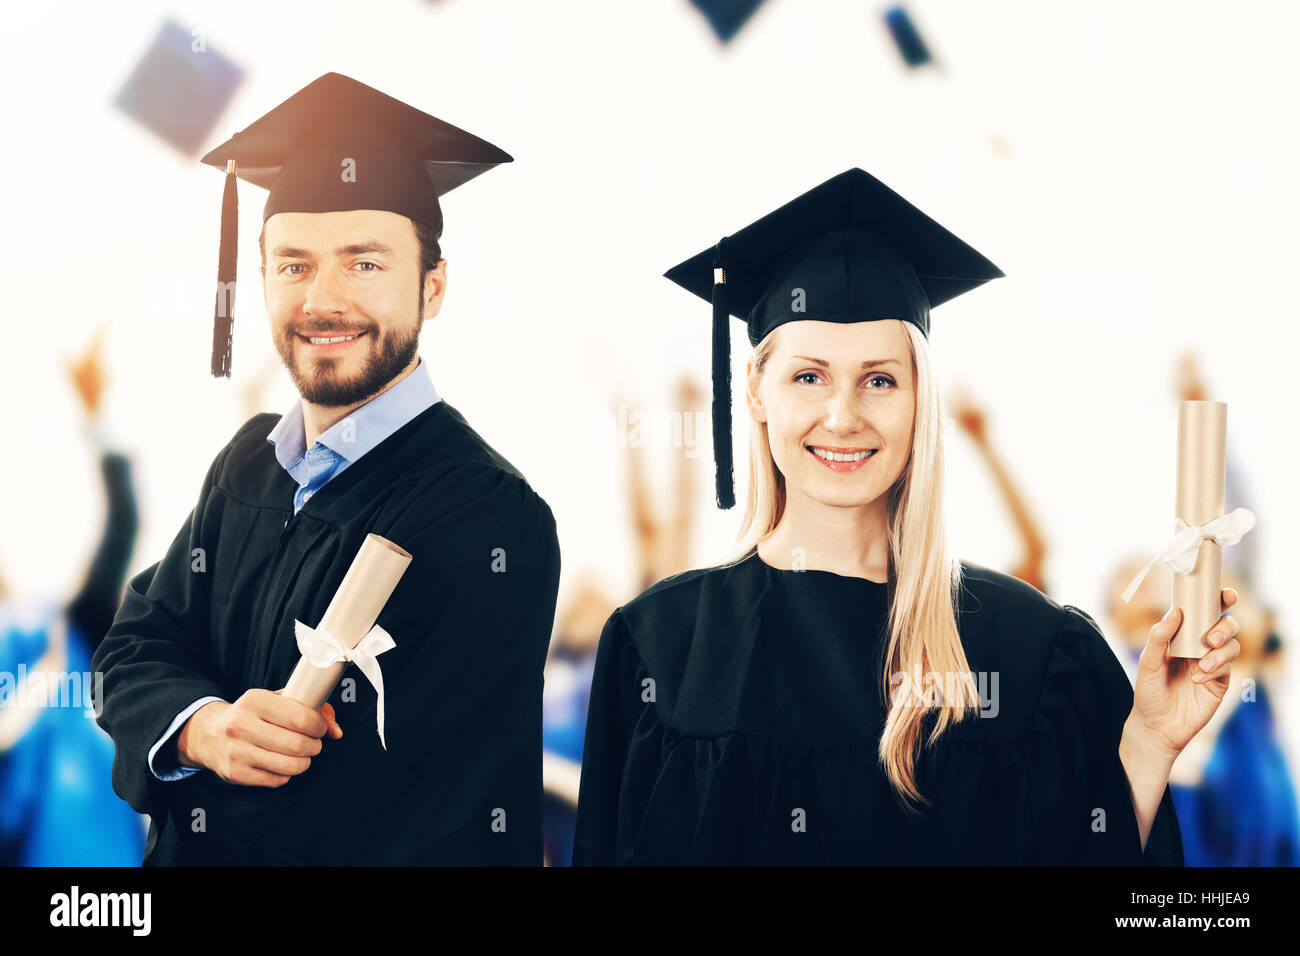 happy graduates with diplomas wearing gowns at graduation ceremony Stock Photo